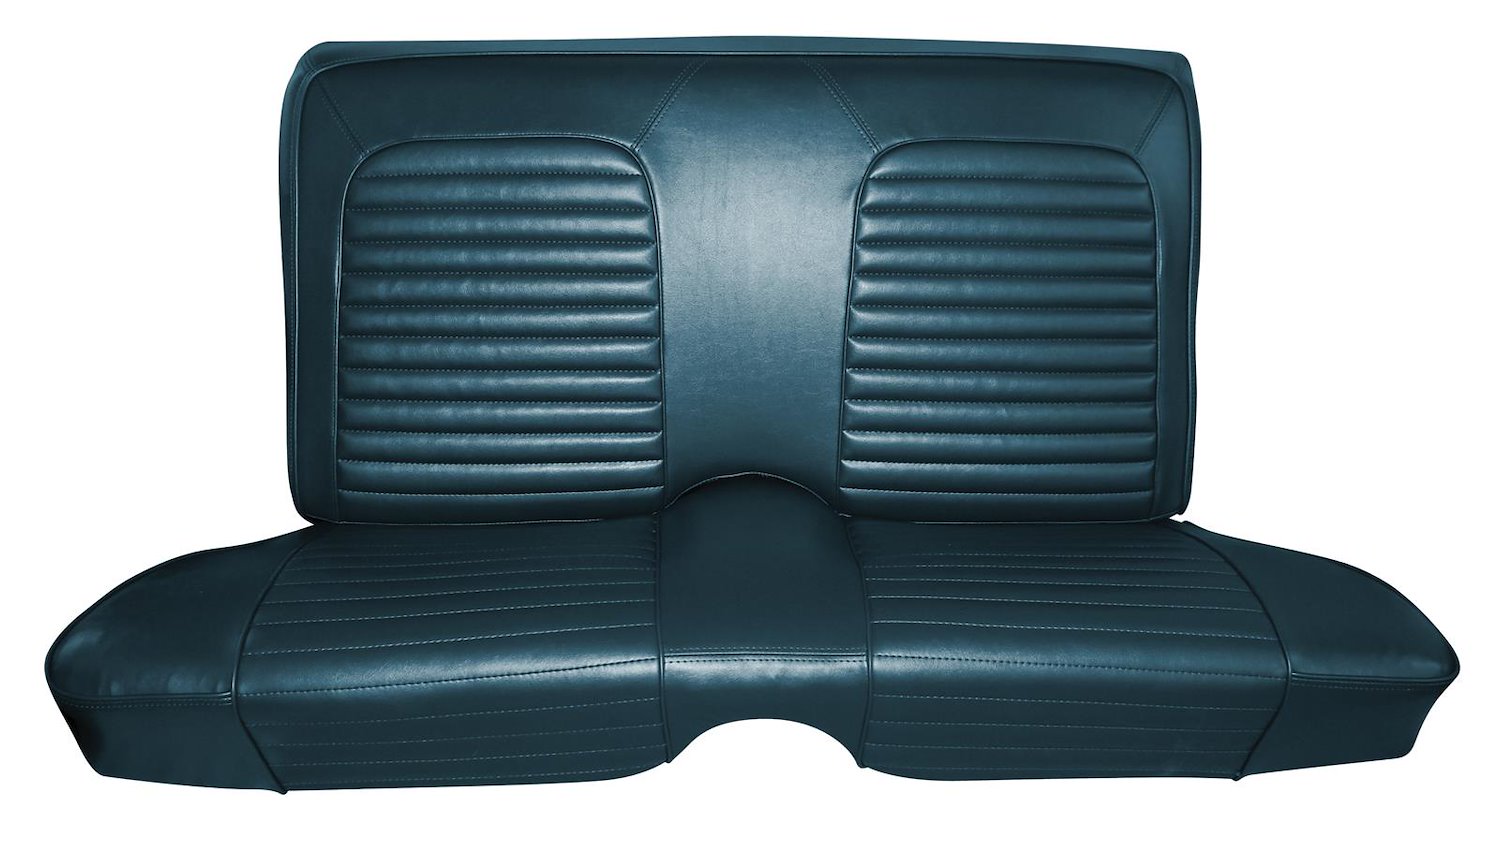 1964 Ford Falcon Futura 2-Door Station Wagon Interior Rear Bench Seat Upholstery Set for Vehicles with a Front Bench Seat